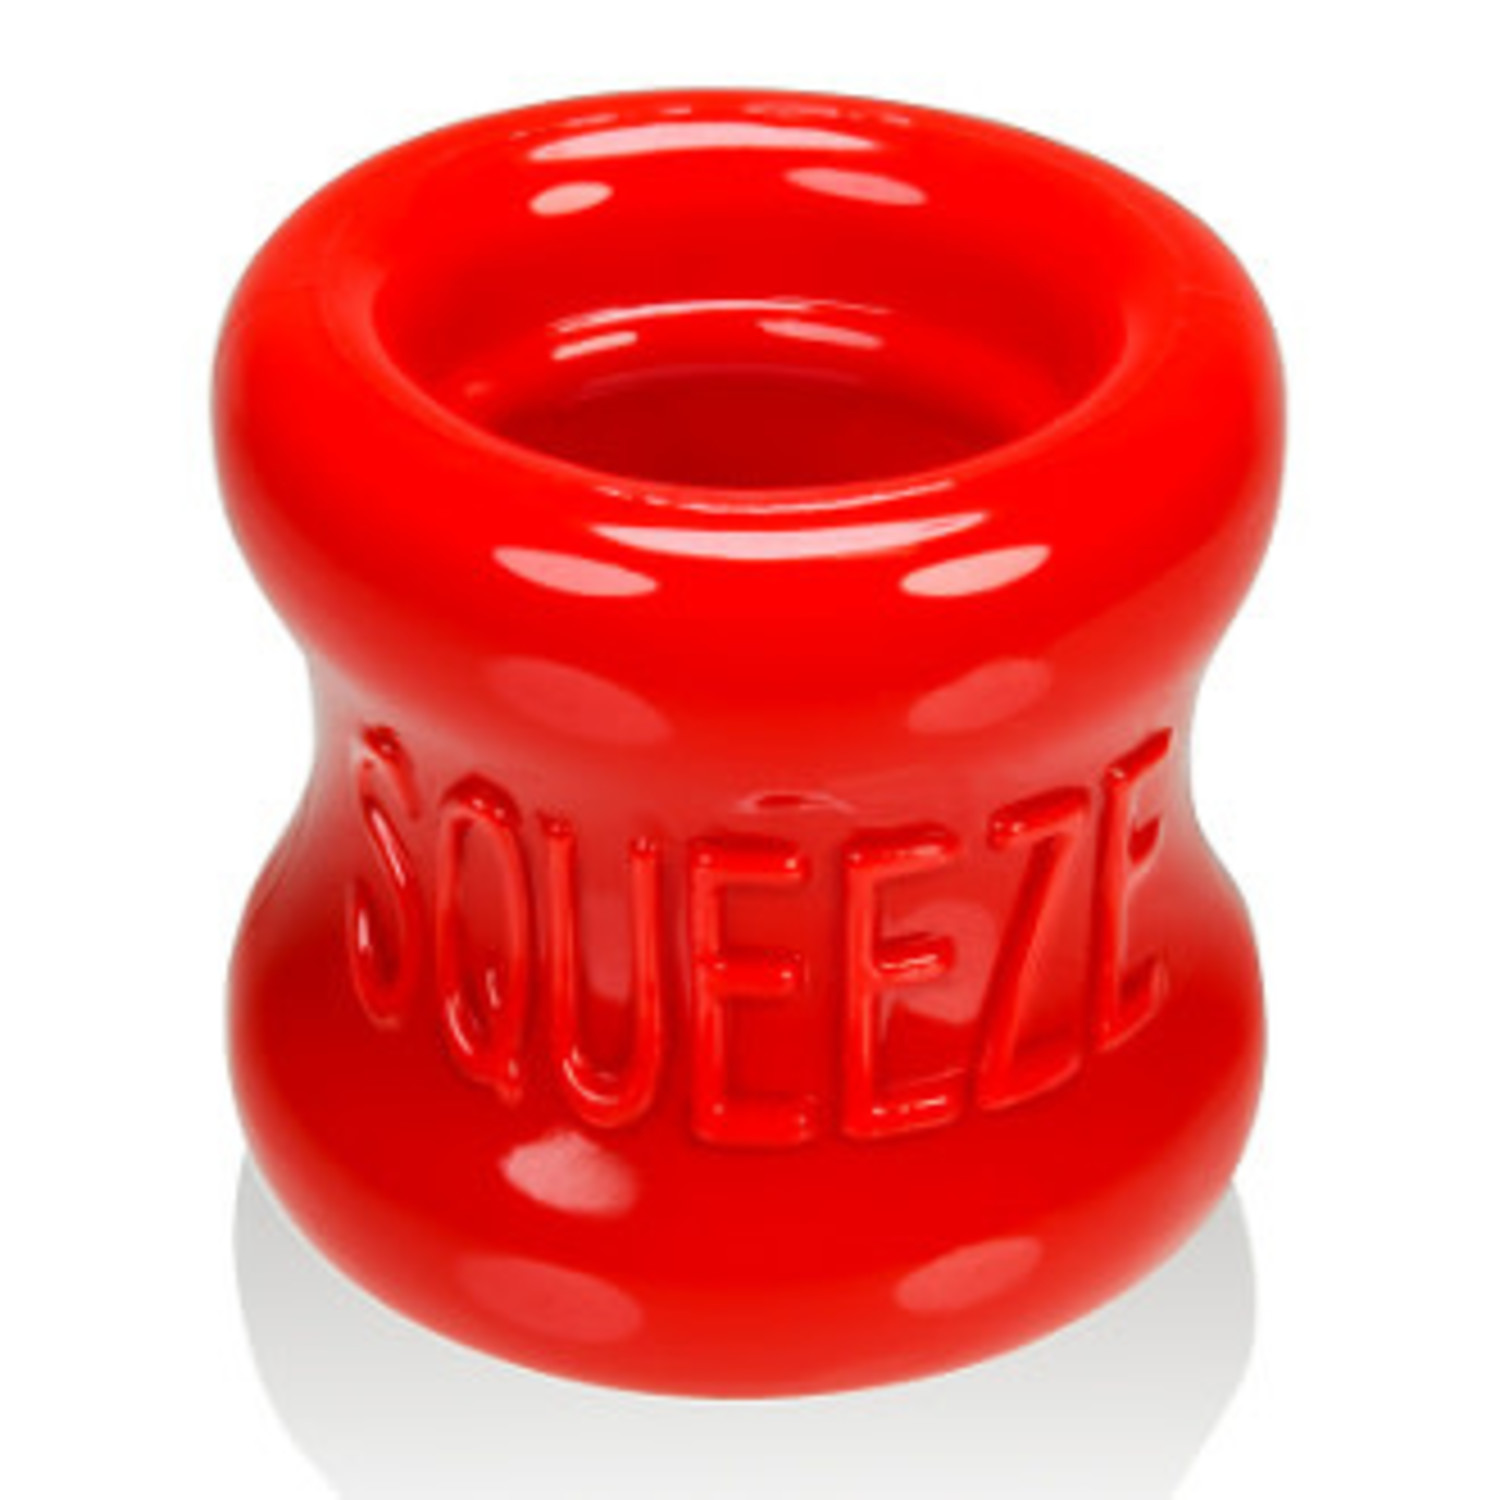 Squeeze Ball Stretcher by Oxballs